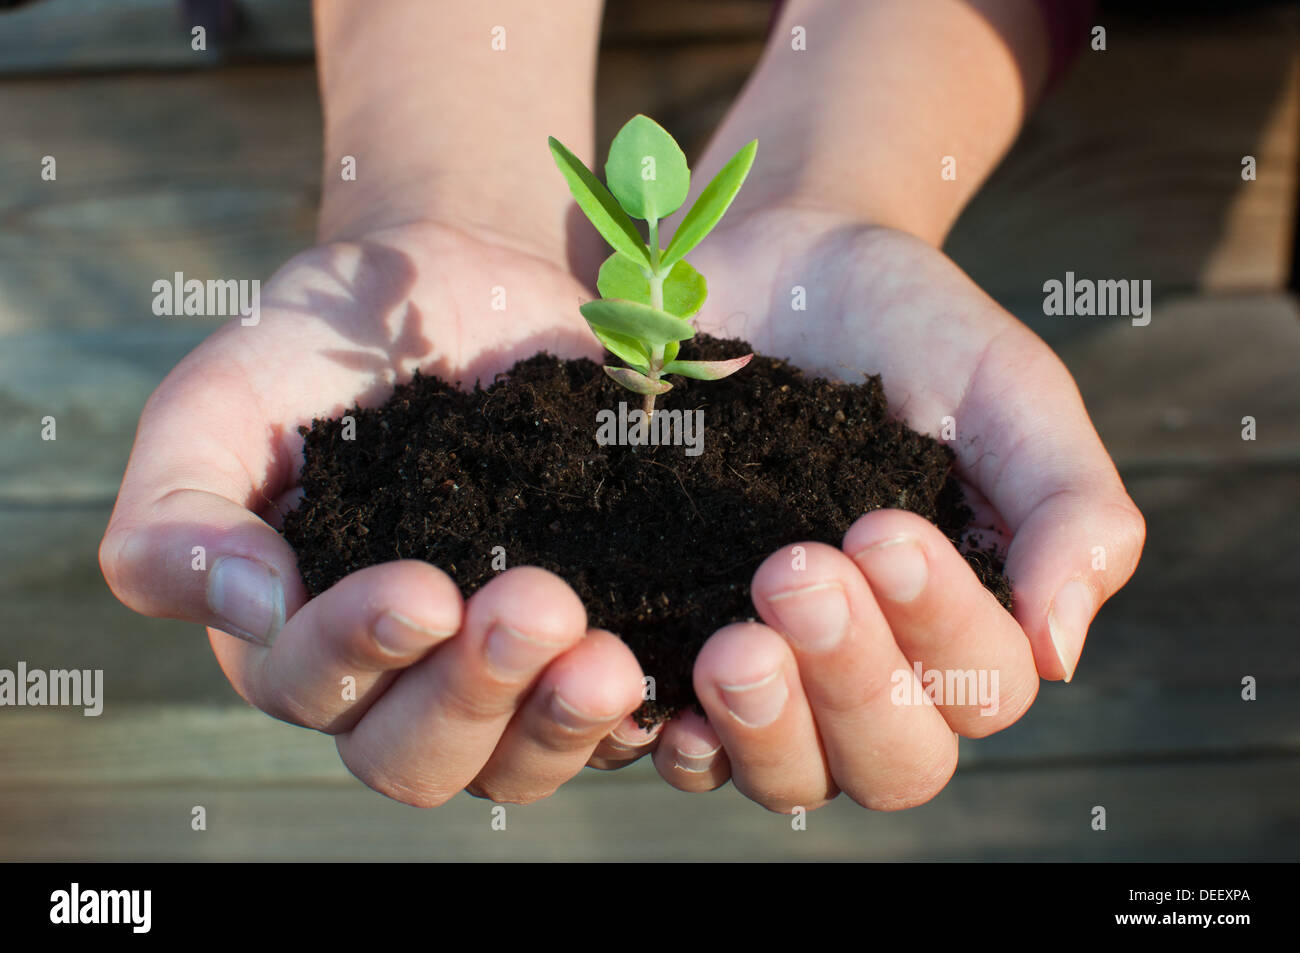 Girl holding a plant in her palms. Stock Photo